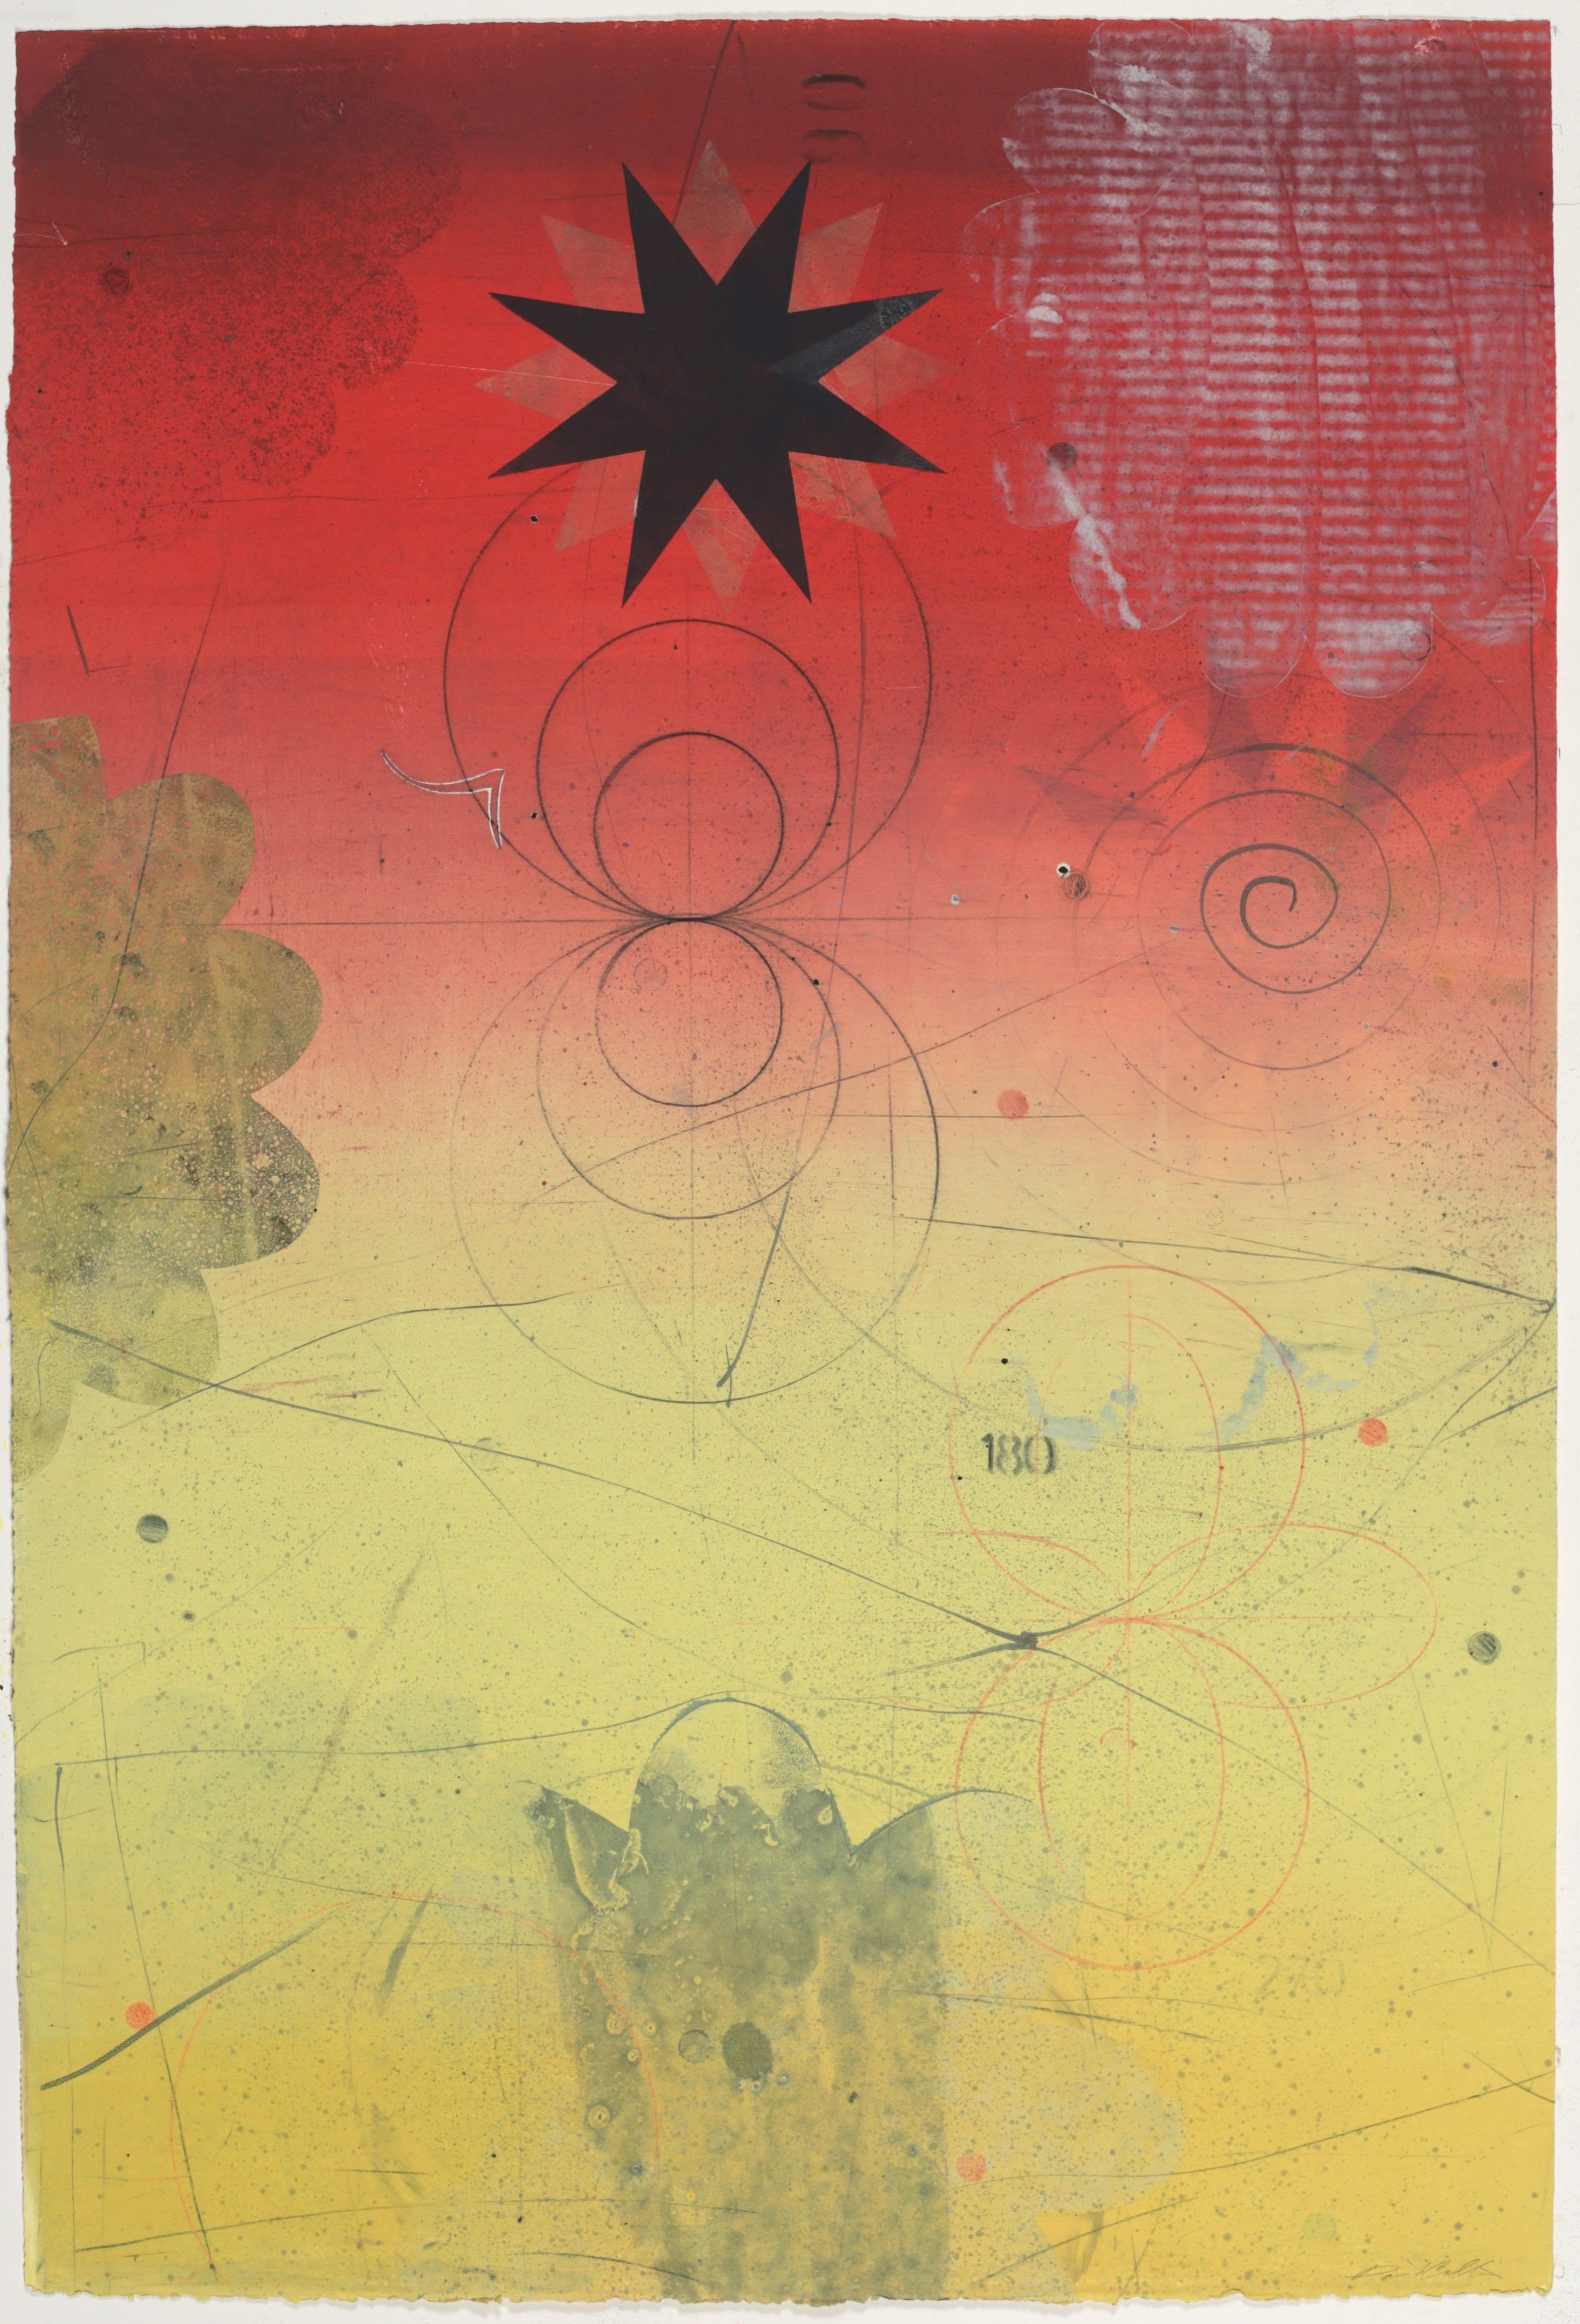 David Collins Abstract Print - Navigator XIII, Yellow, Red Vertical Abstract Monotype with Black Star, Circles